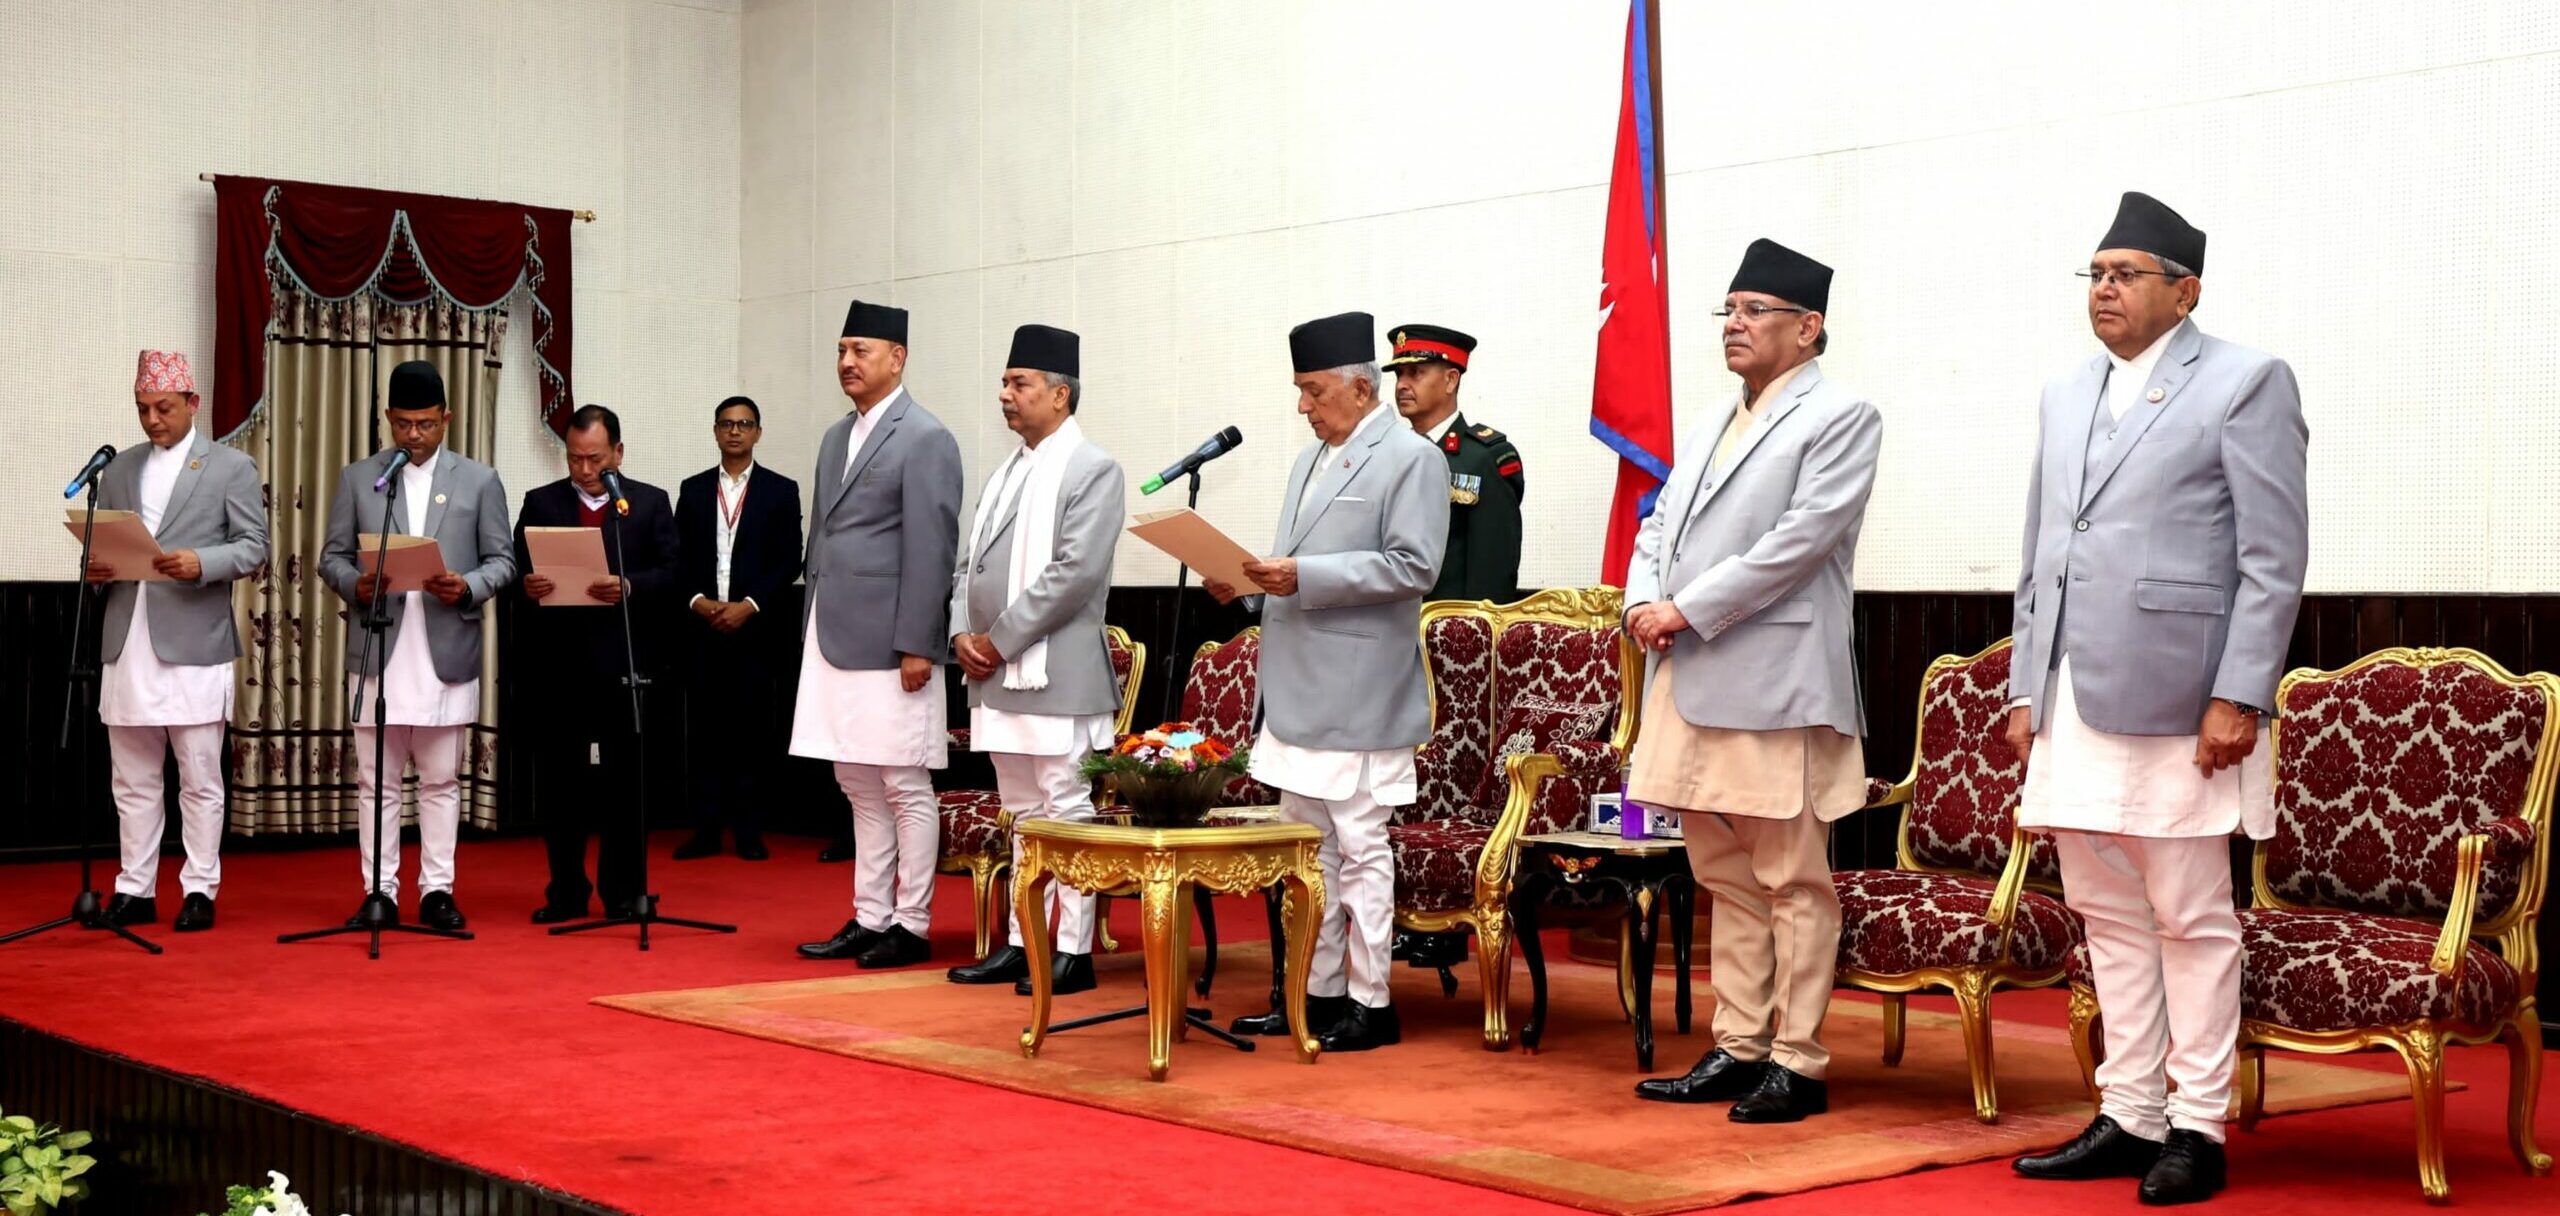 Three ministers from new coalition sworn in